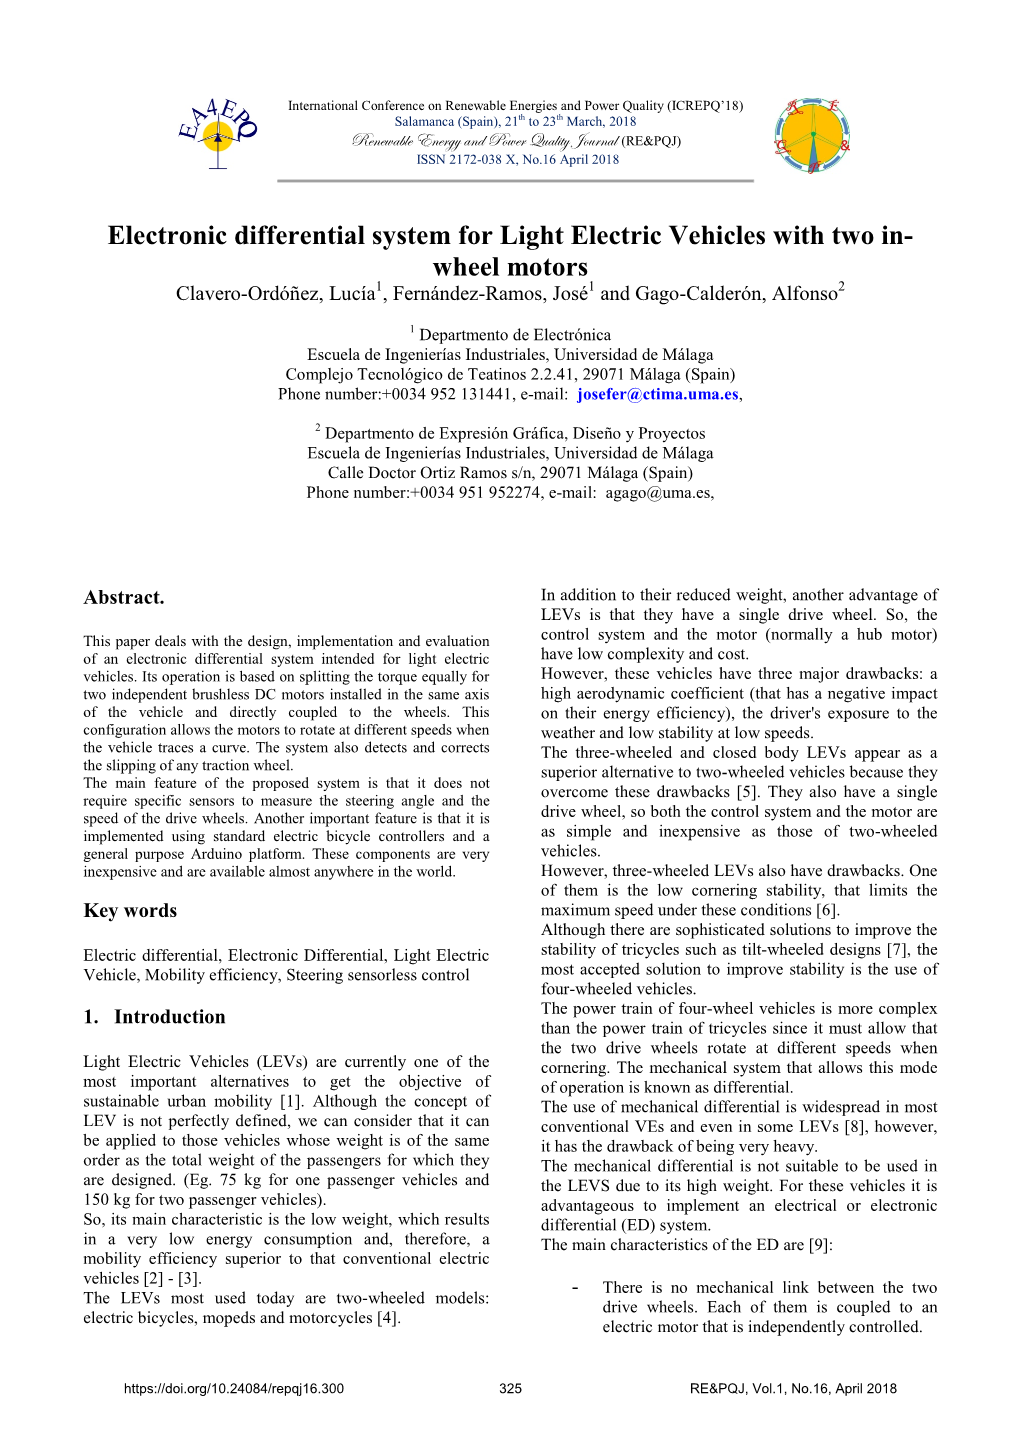 Electronic Differential System for Light Electric Vehicles with Two In- Wheel Motors Clavero-Ordóñez, Lucía1, Fernández-Ramos, José1 and Gago-Calderón, Alfonso2